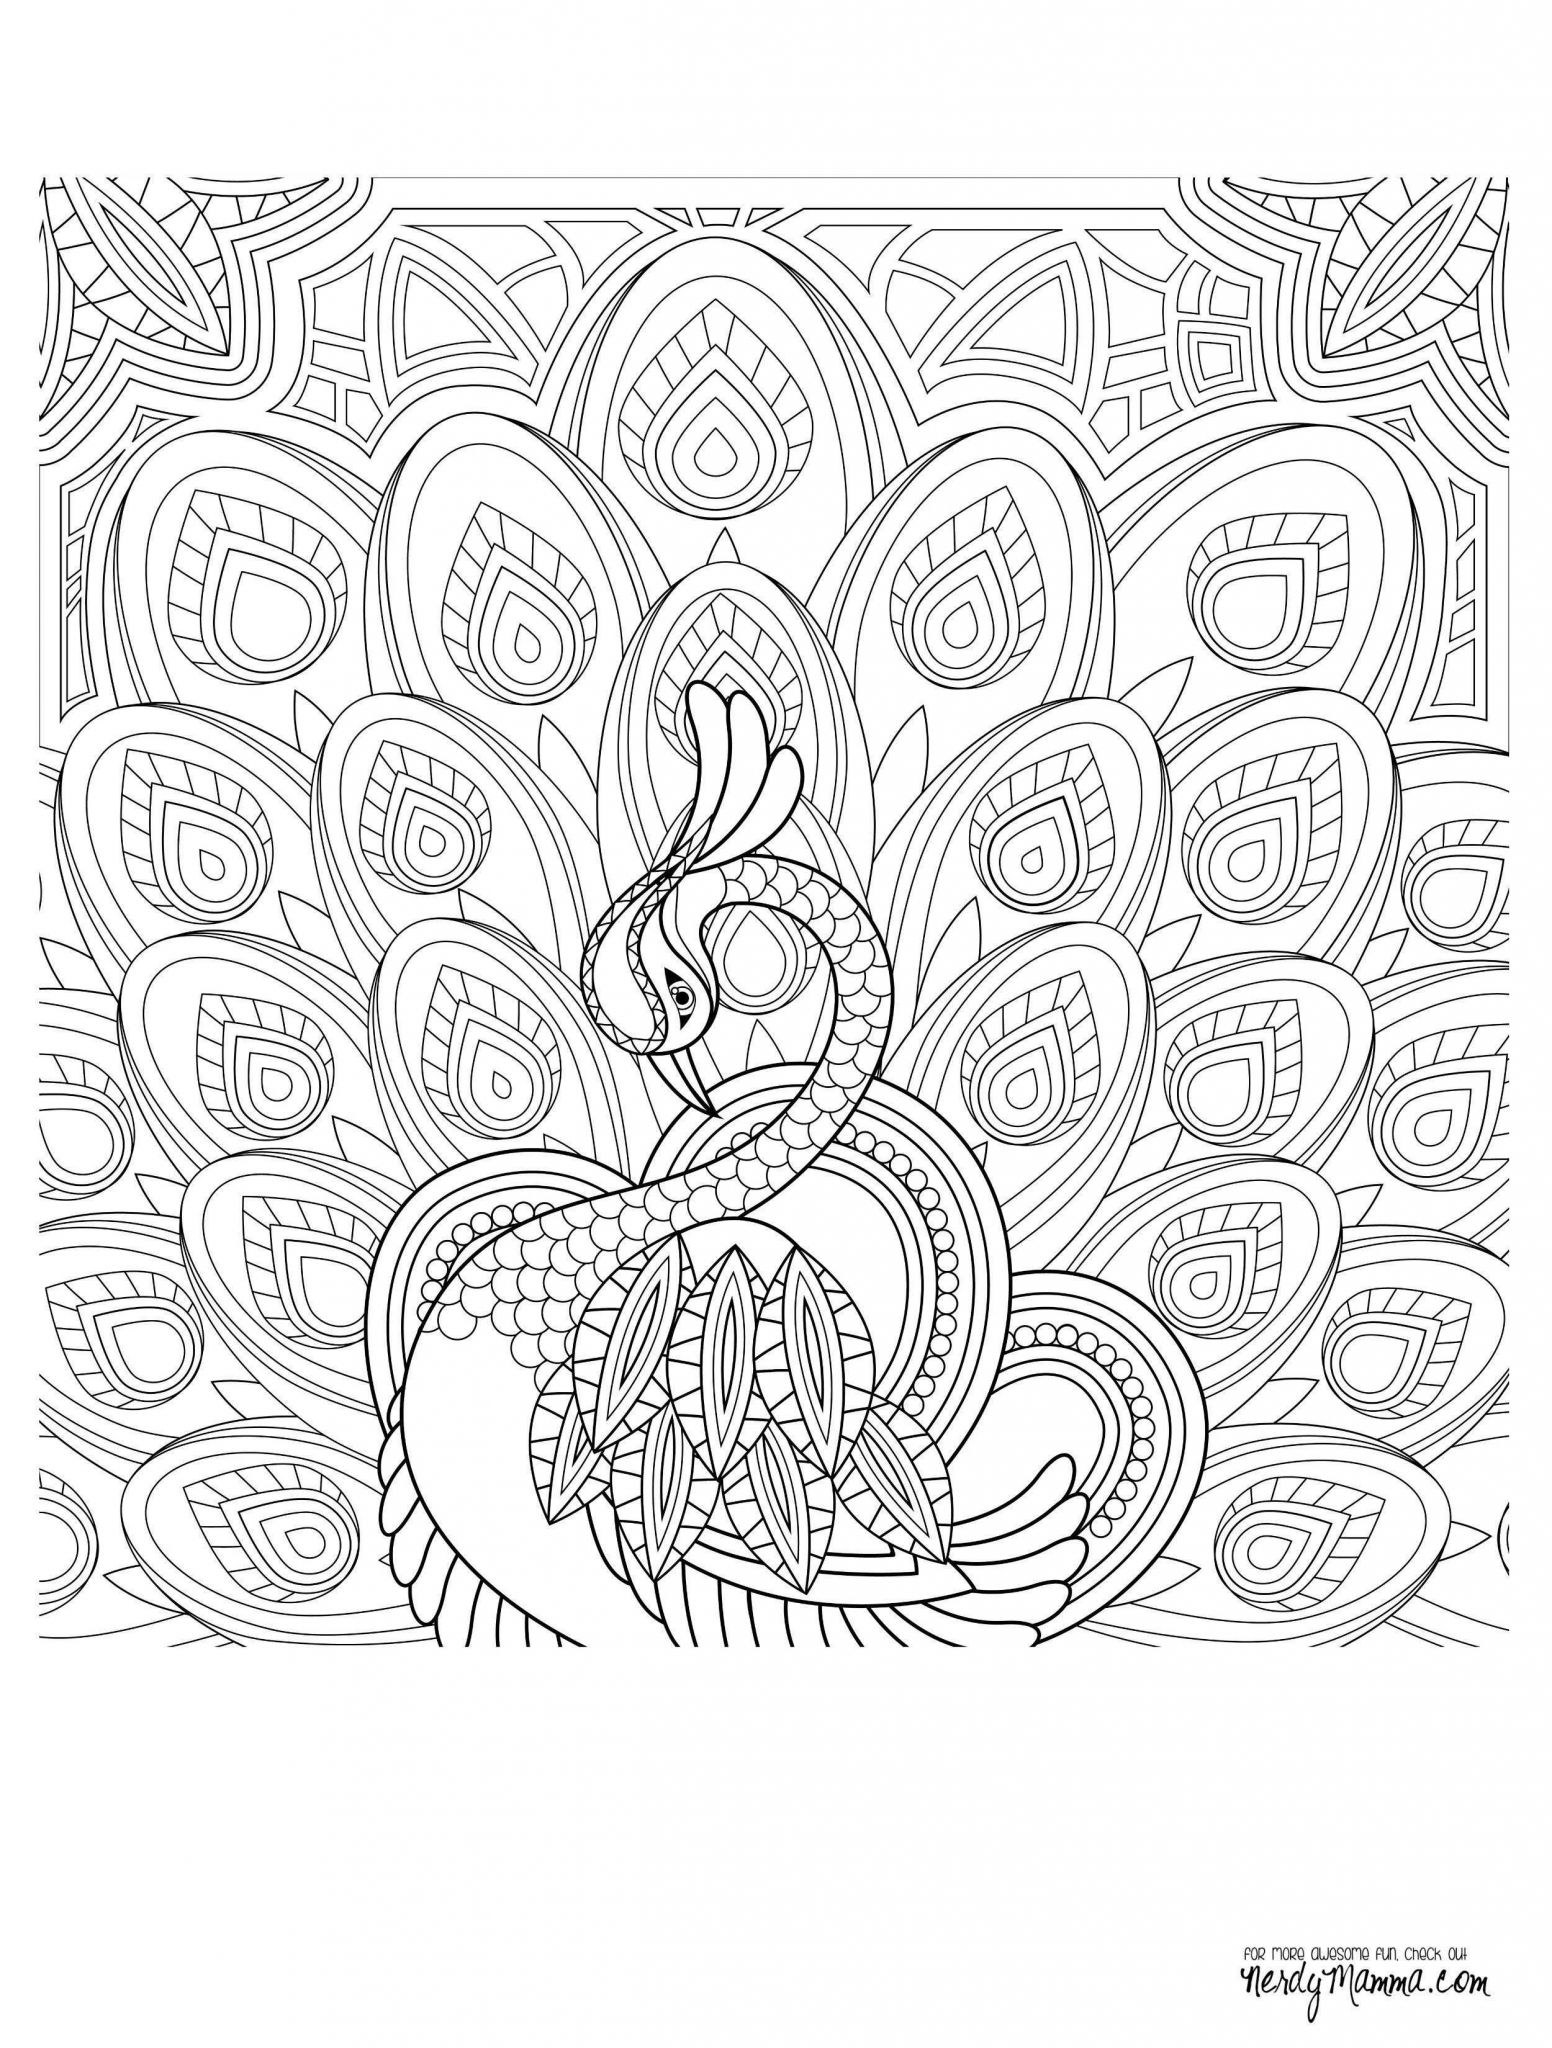 Our Father Prayer Worksheet and Our Father Prayer Coloring Page Unique Jesus Hands Open Crafts and